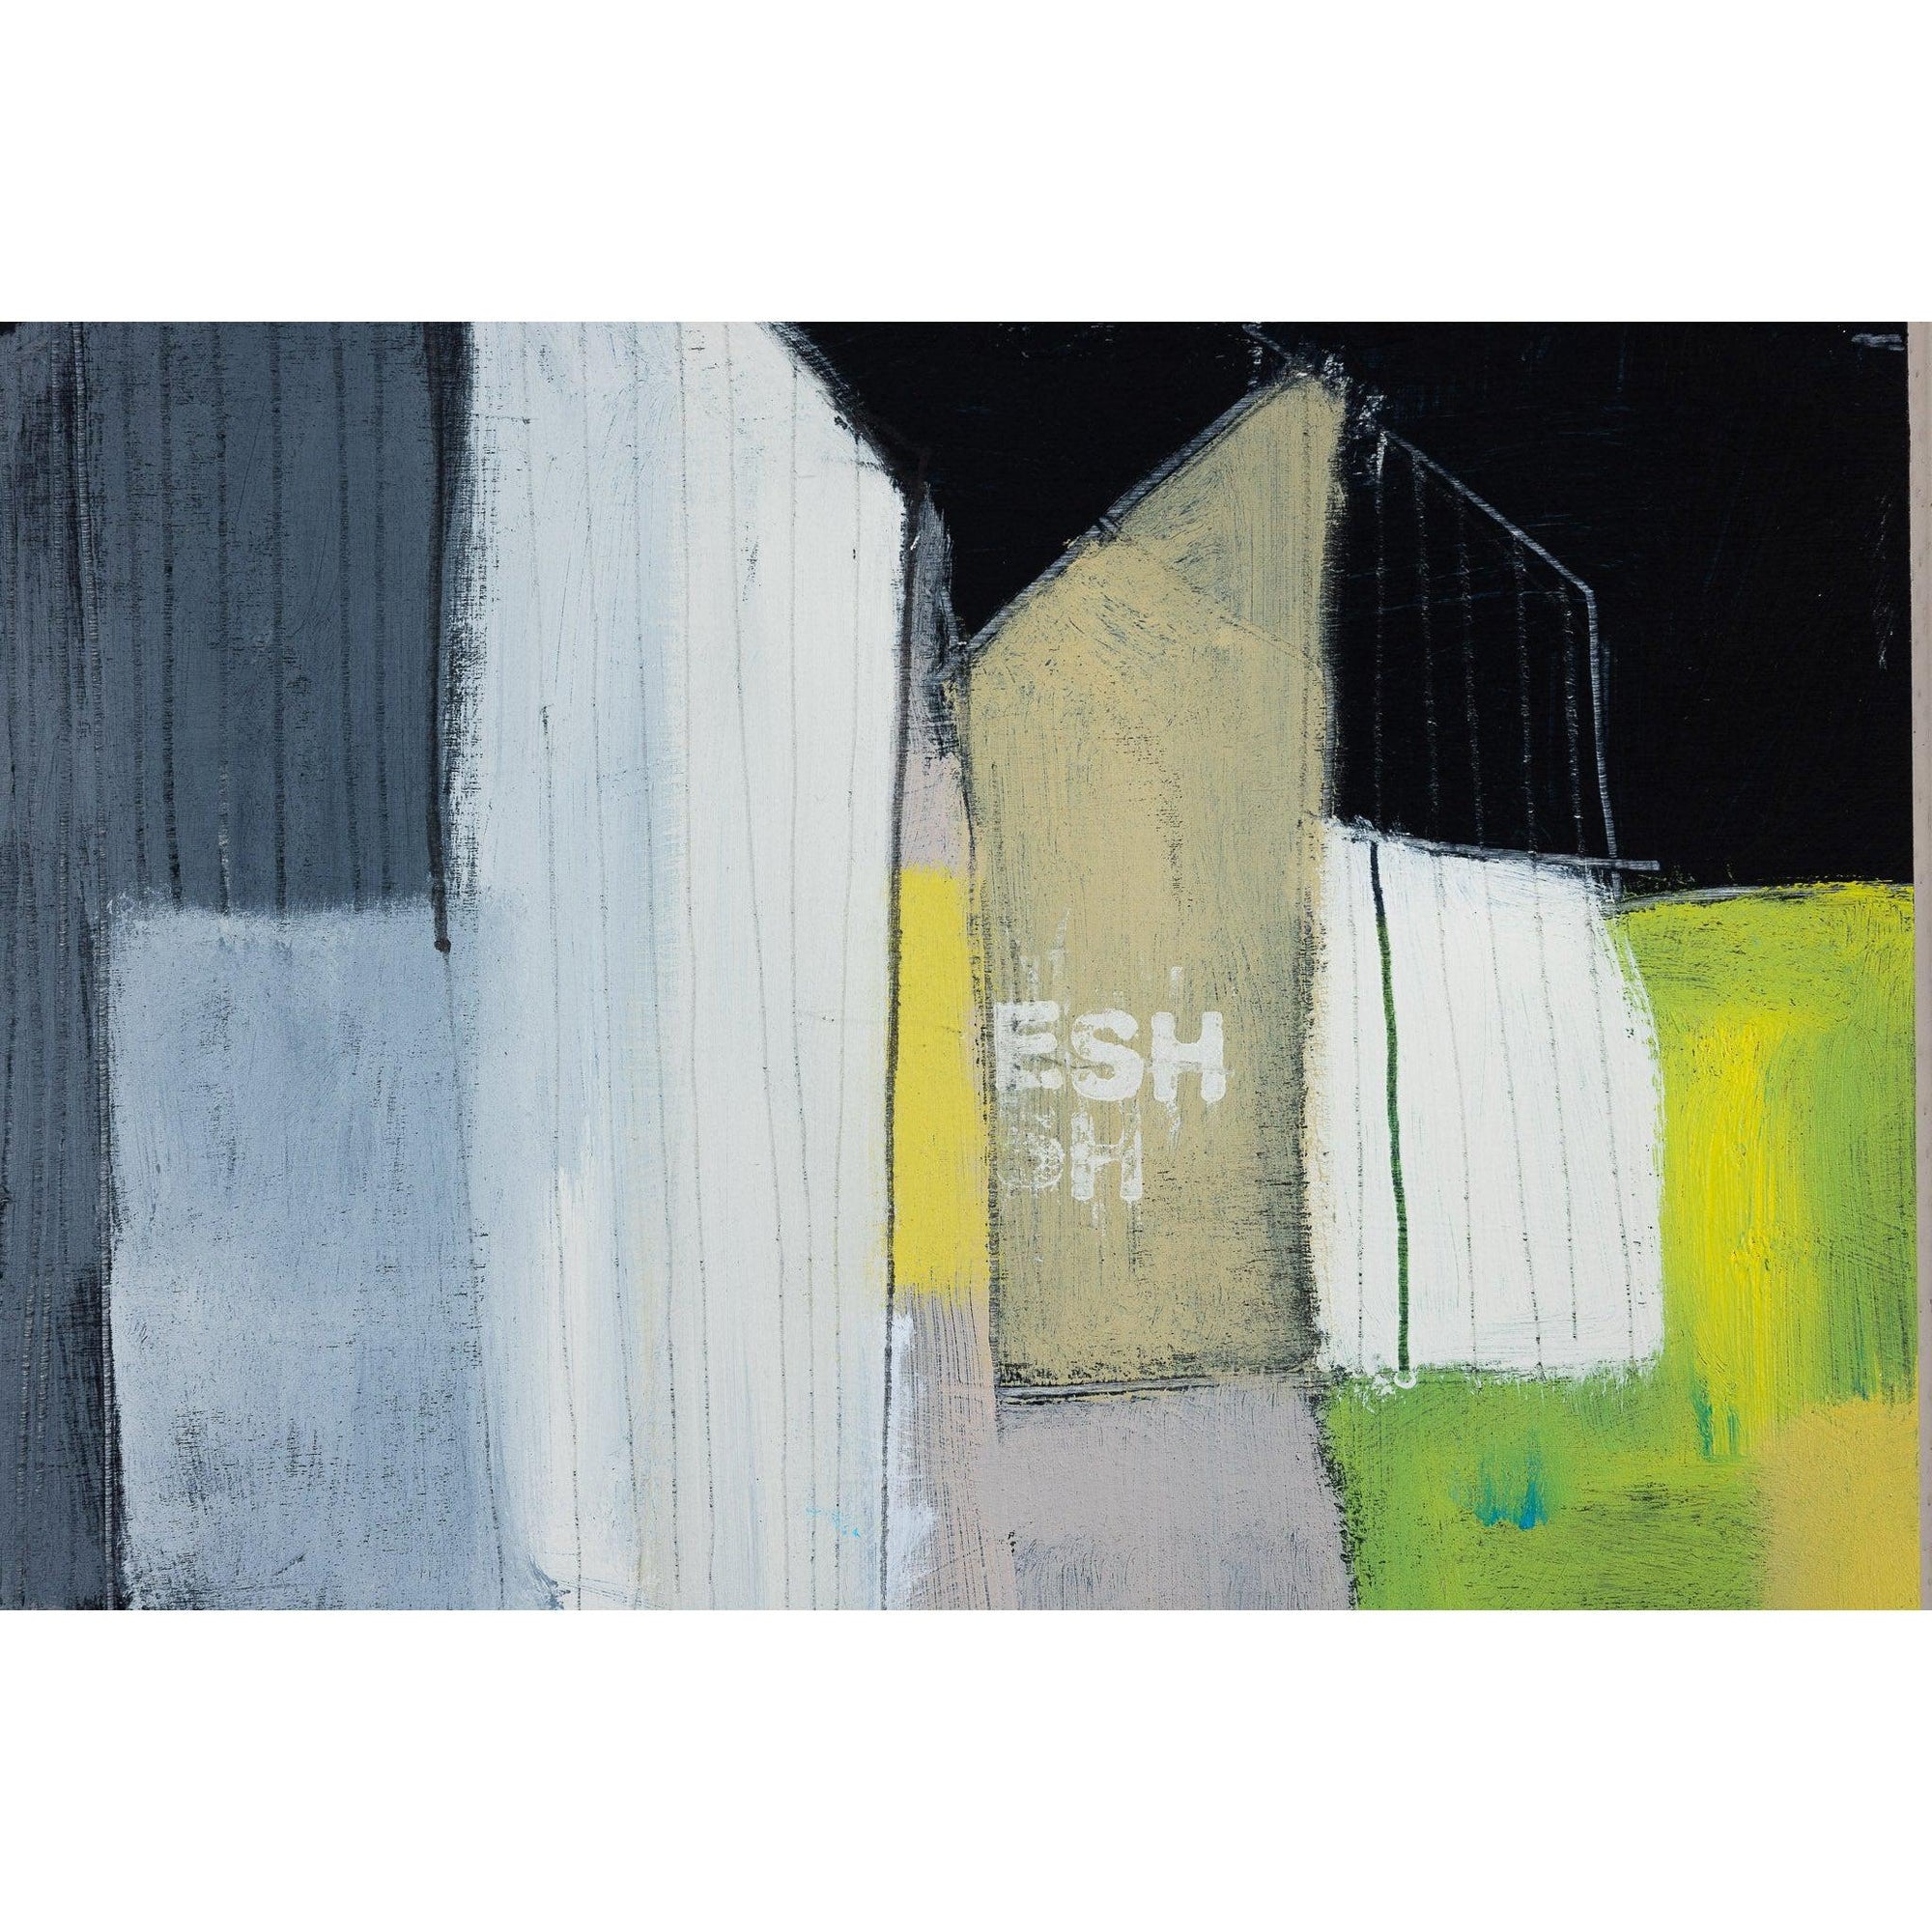 After Hours by John Button, mixed media original, available at Padstow Gallery, Cornwall